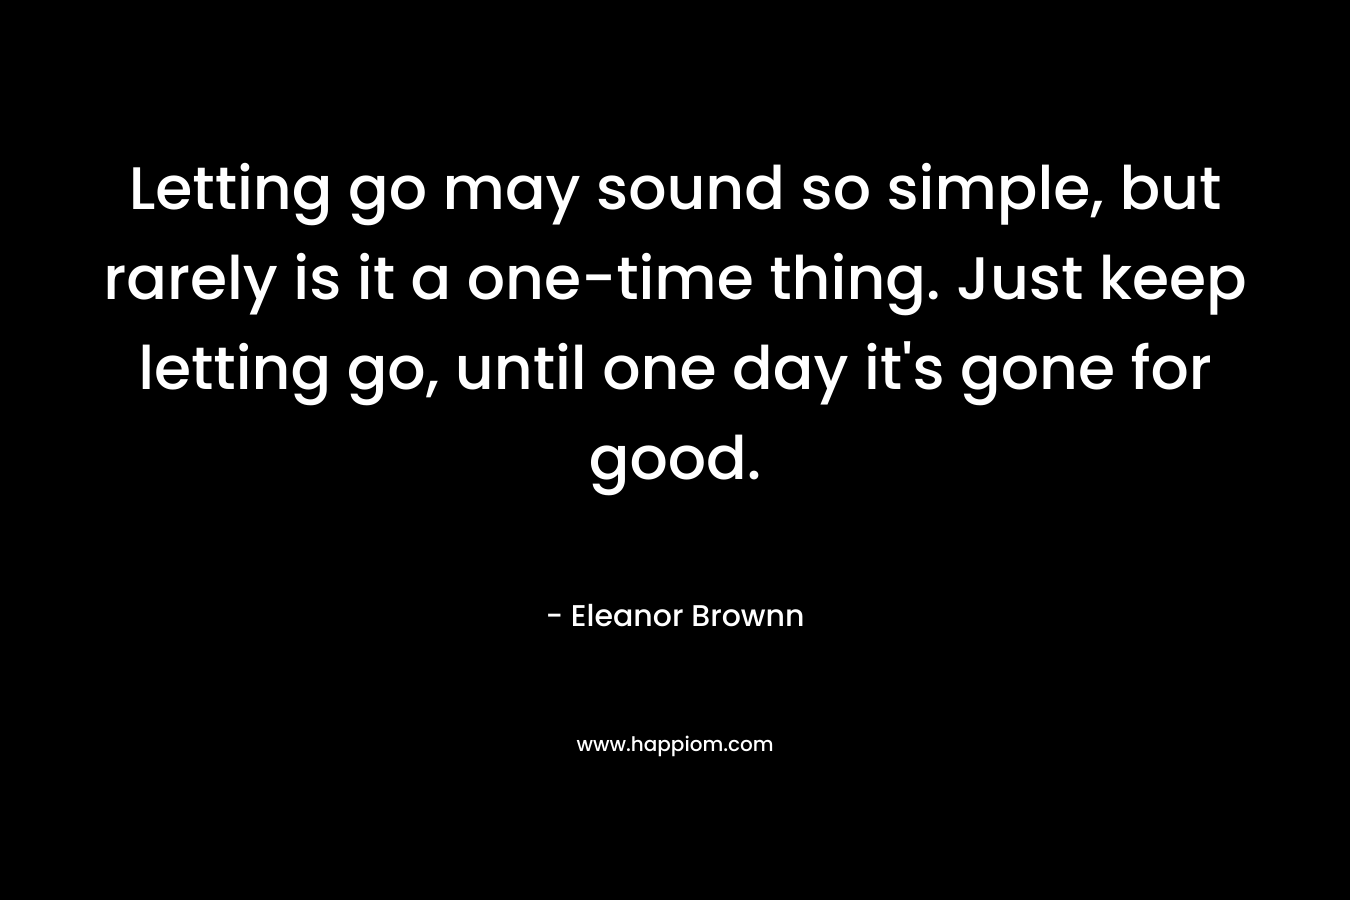 Letting go may sound so simple, but rarely is it a one-time thing. Just keep letting go, until one day it’s gone for good. – Eleanor Brownn